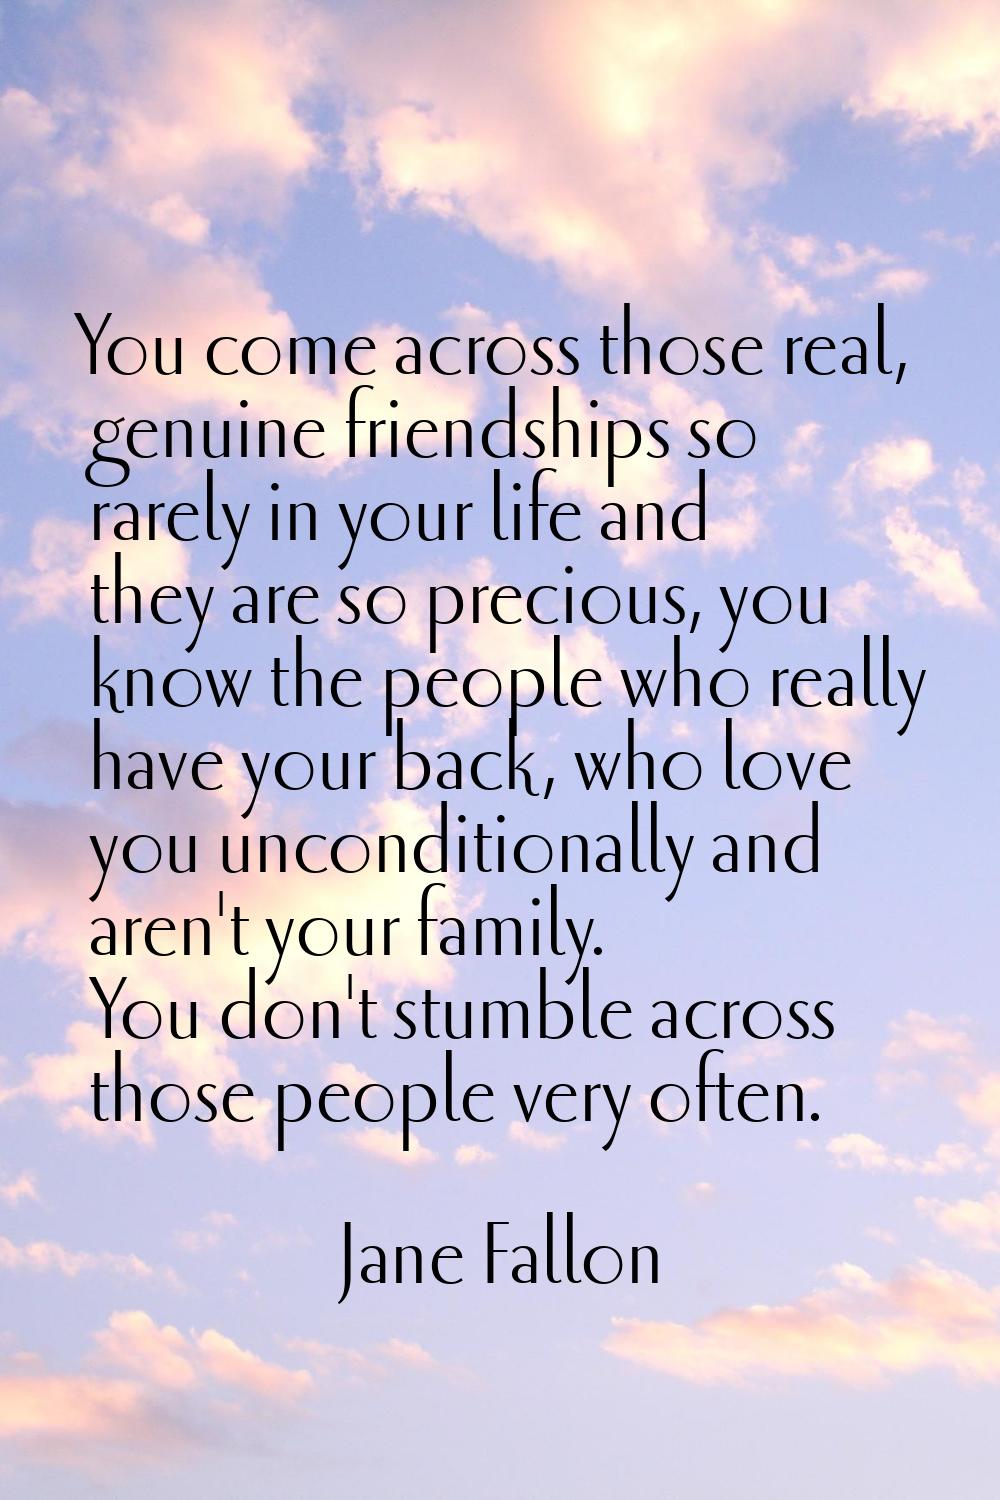 You come across those real, genuine friendships so rarely in your life and they are so precious, yo